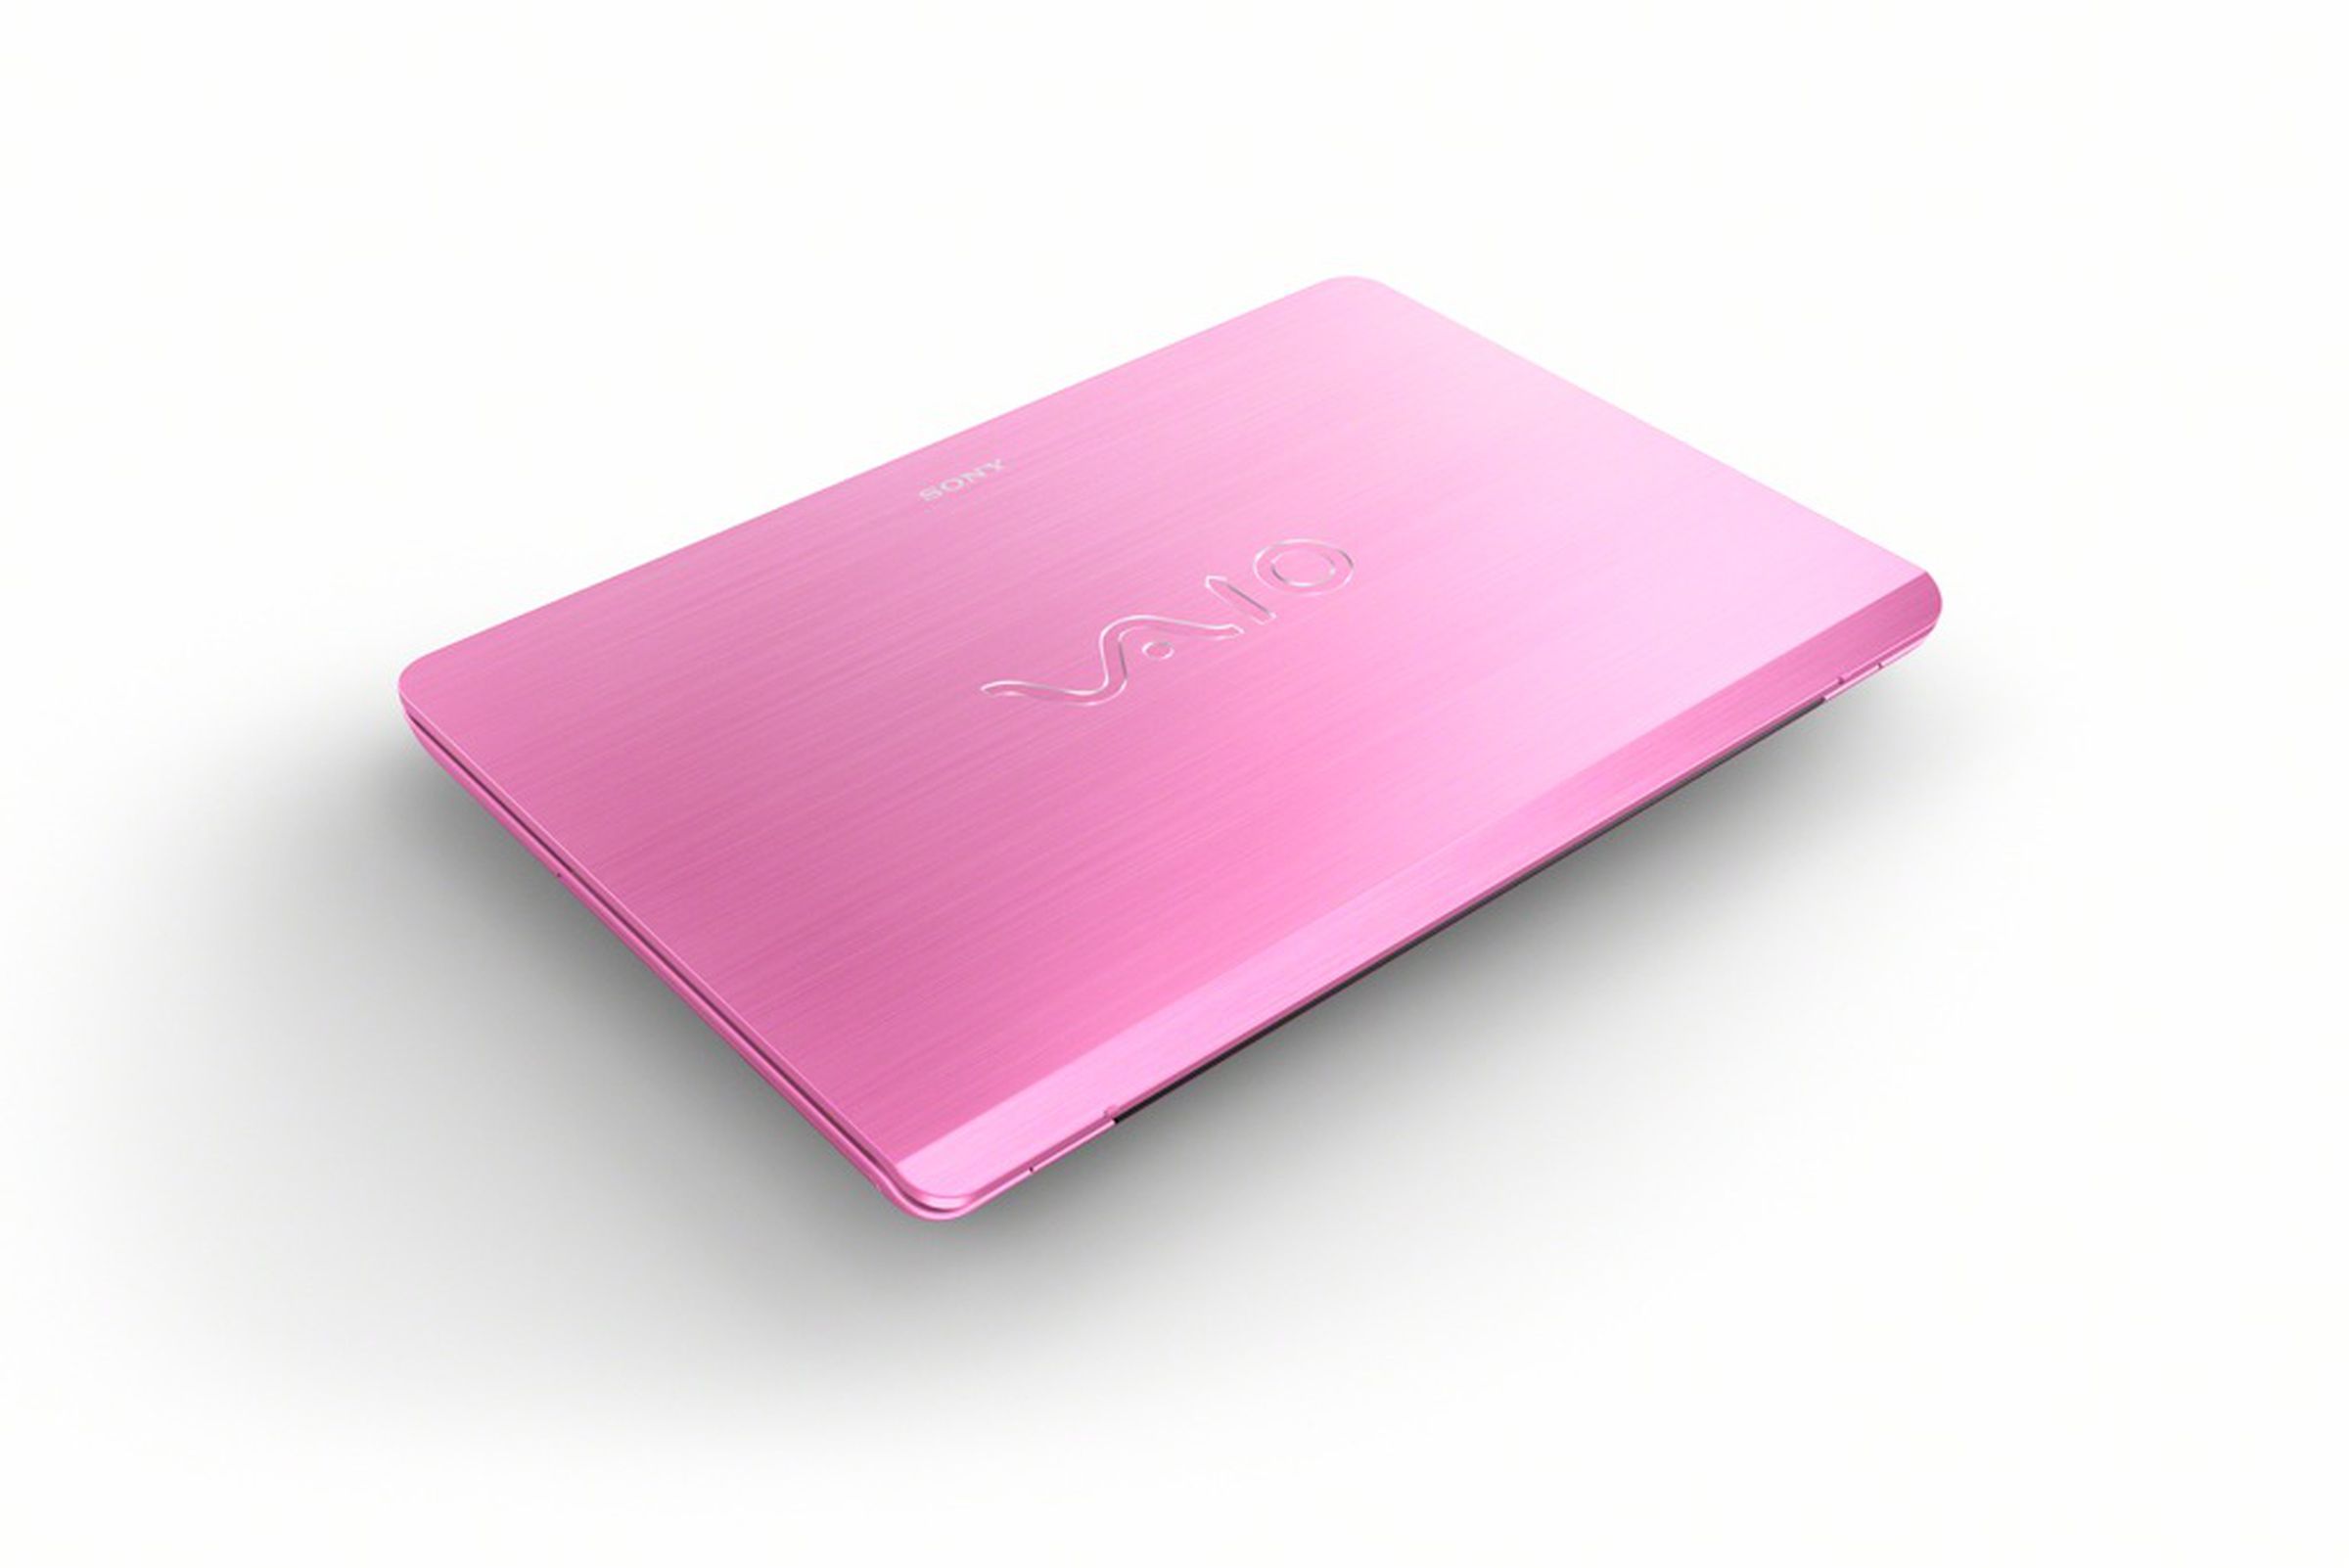 Sony VAIO Fit pictures